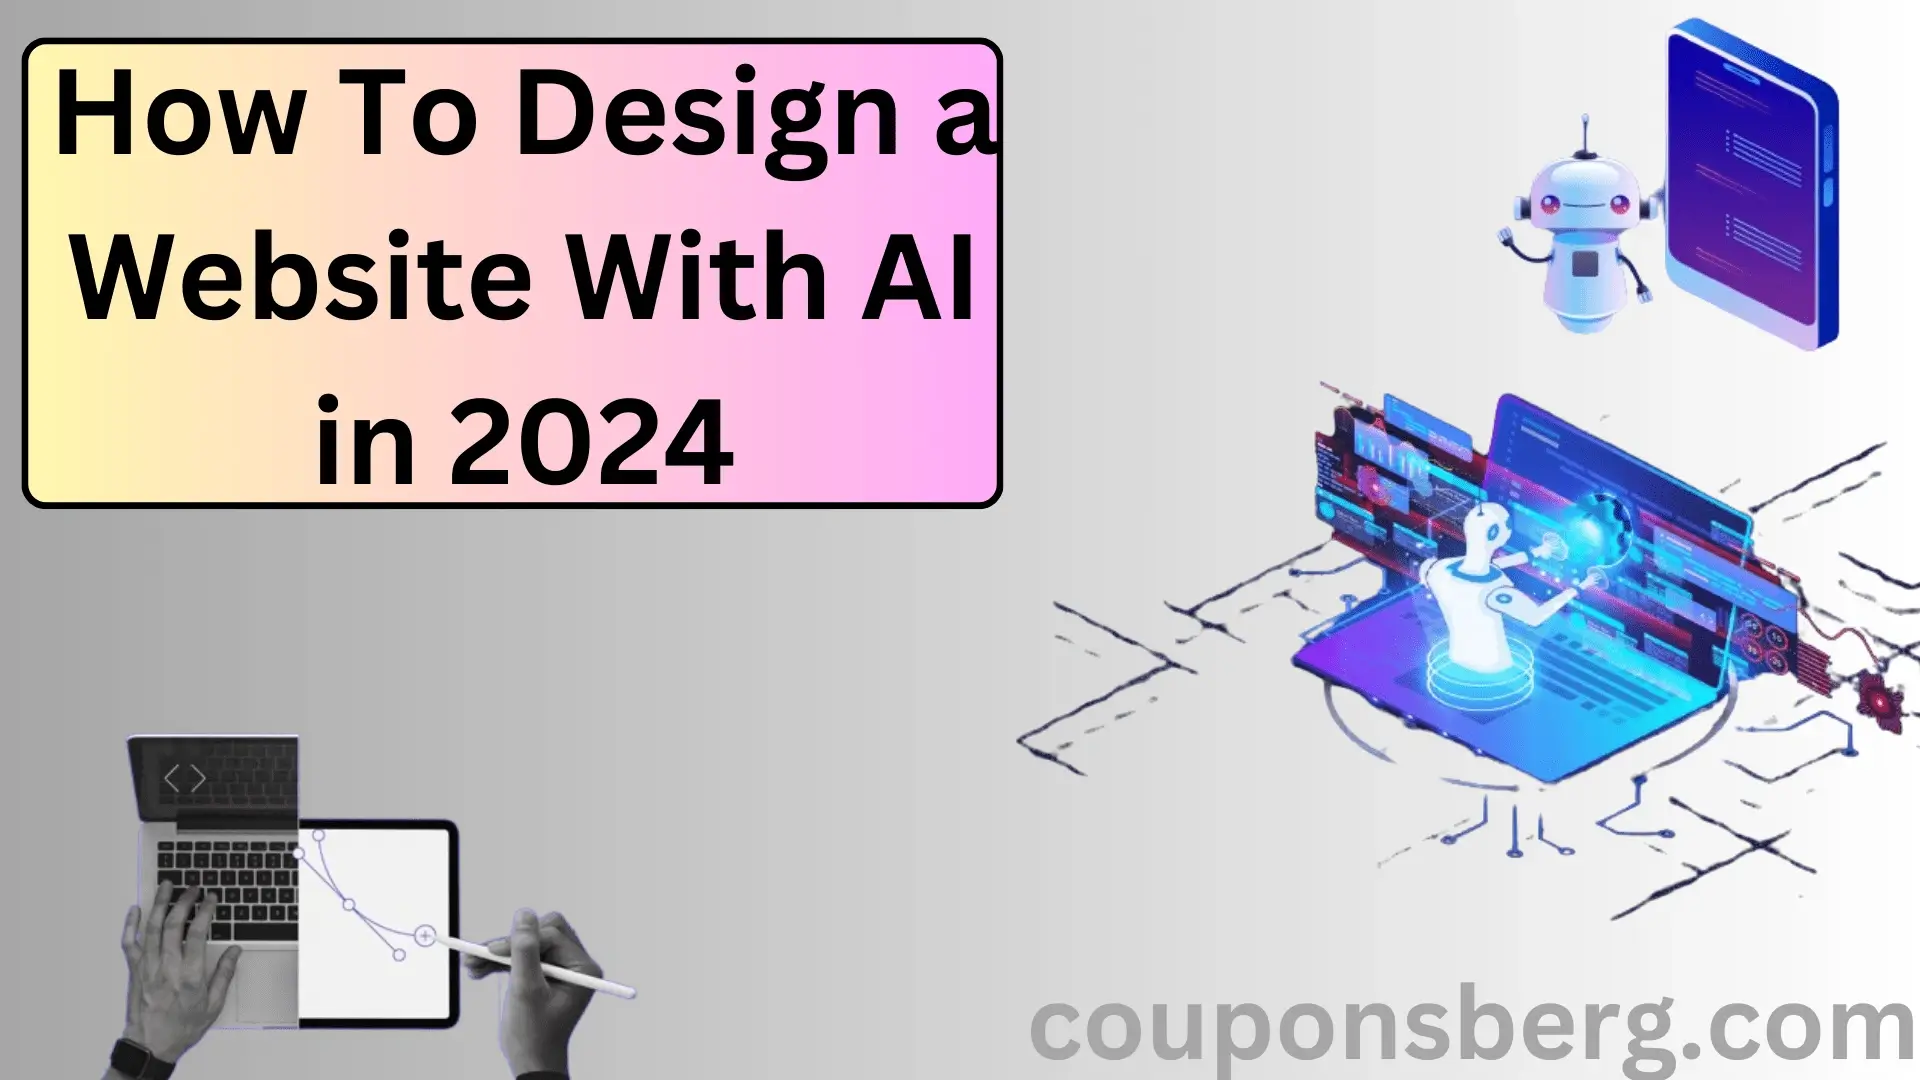 How To Design a Website With AI in 2024